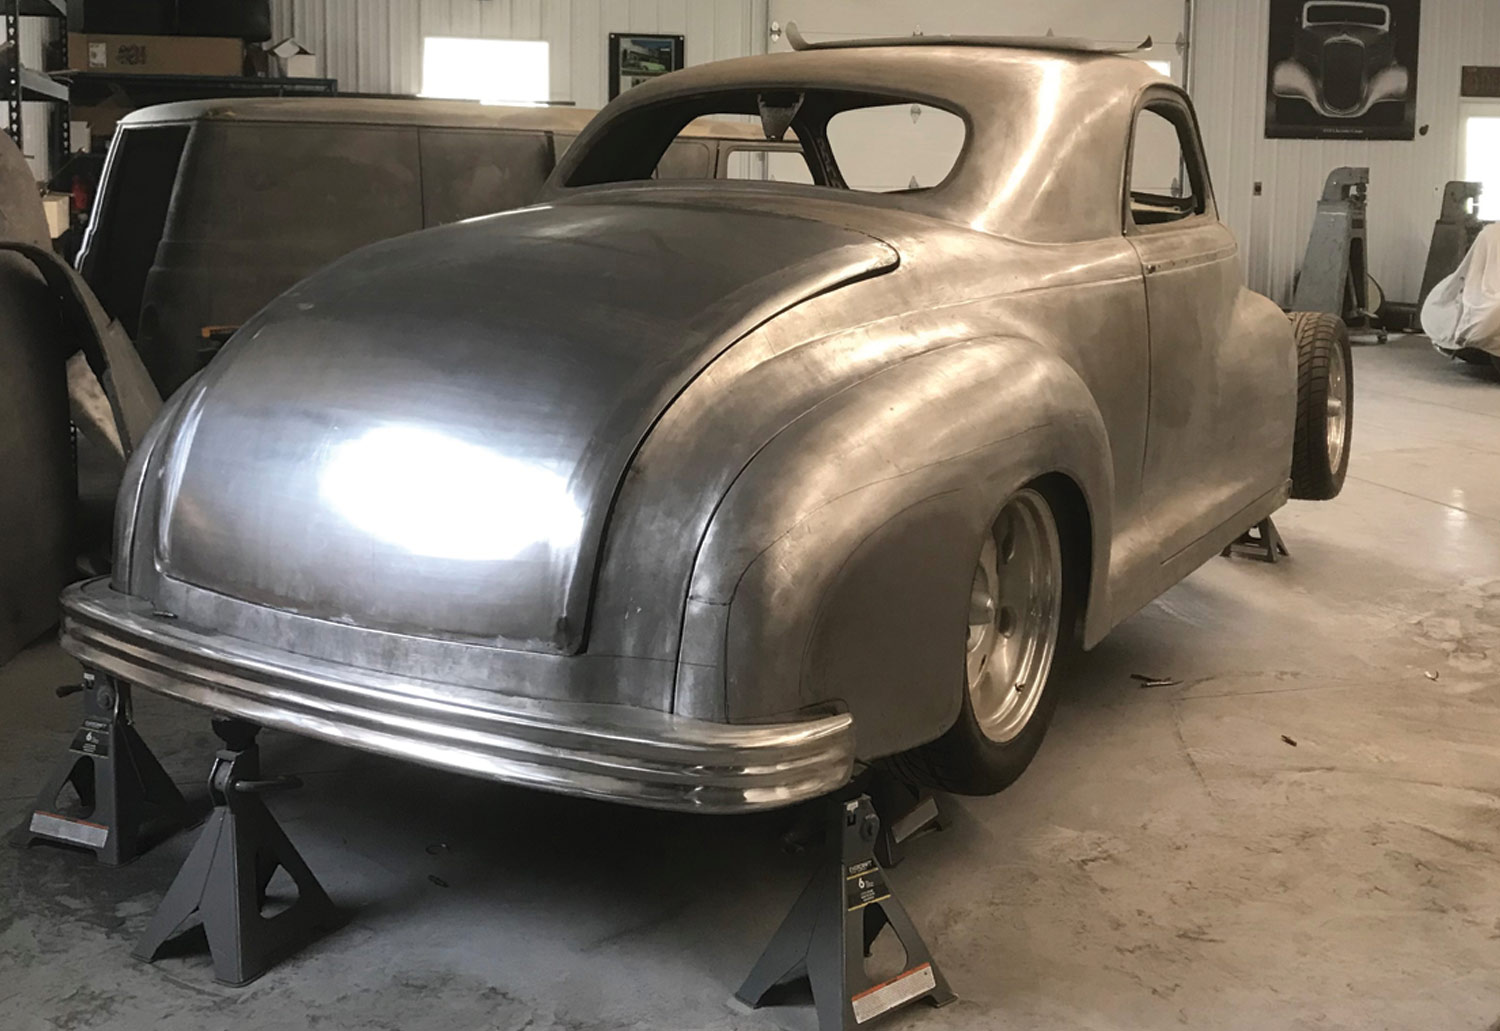 three quarter rear view of the decklid outer panel welded into one piece and fine-tuned